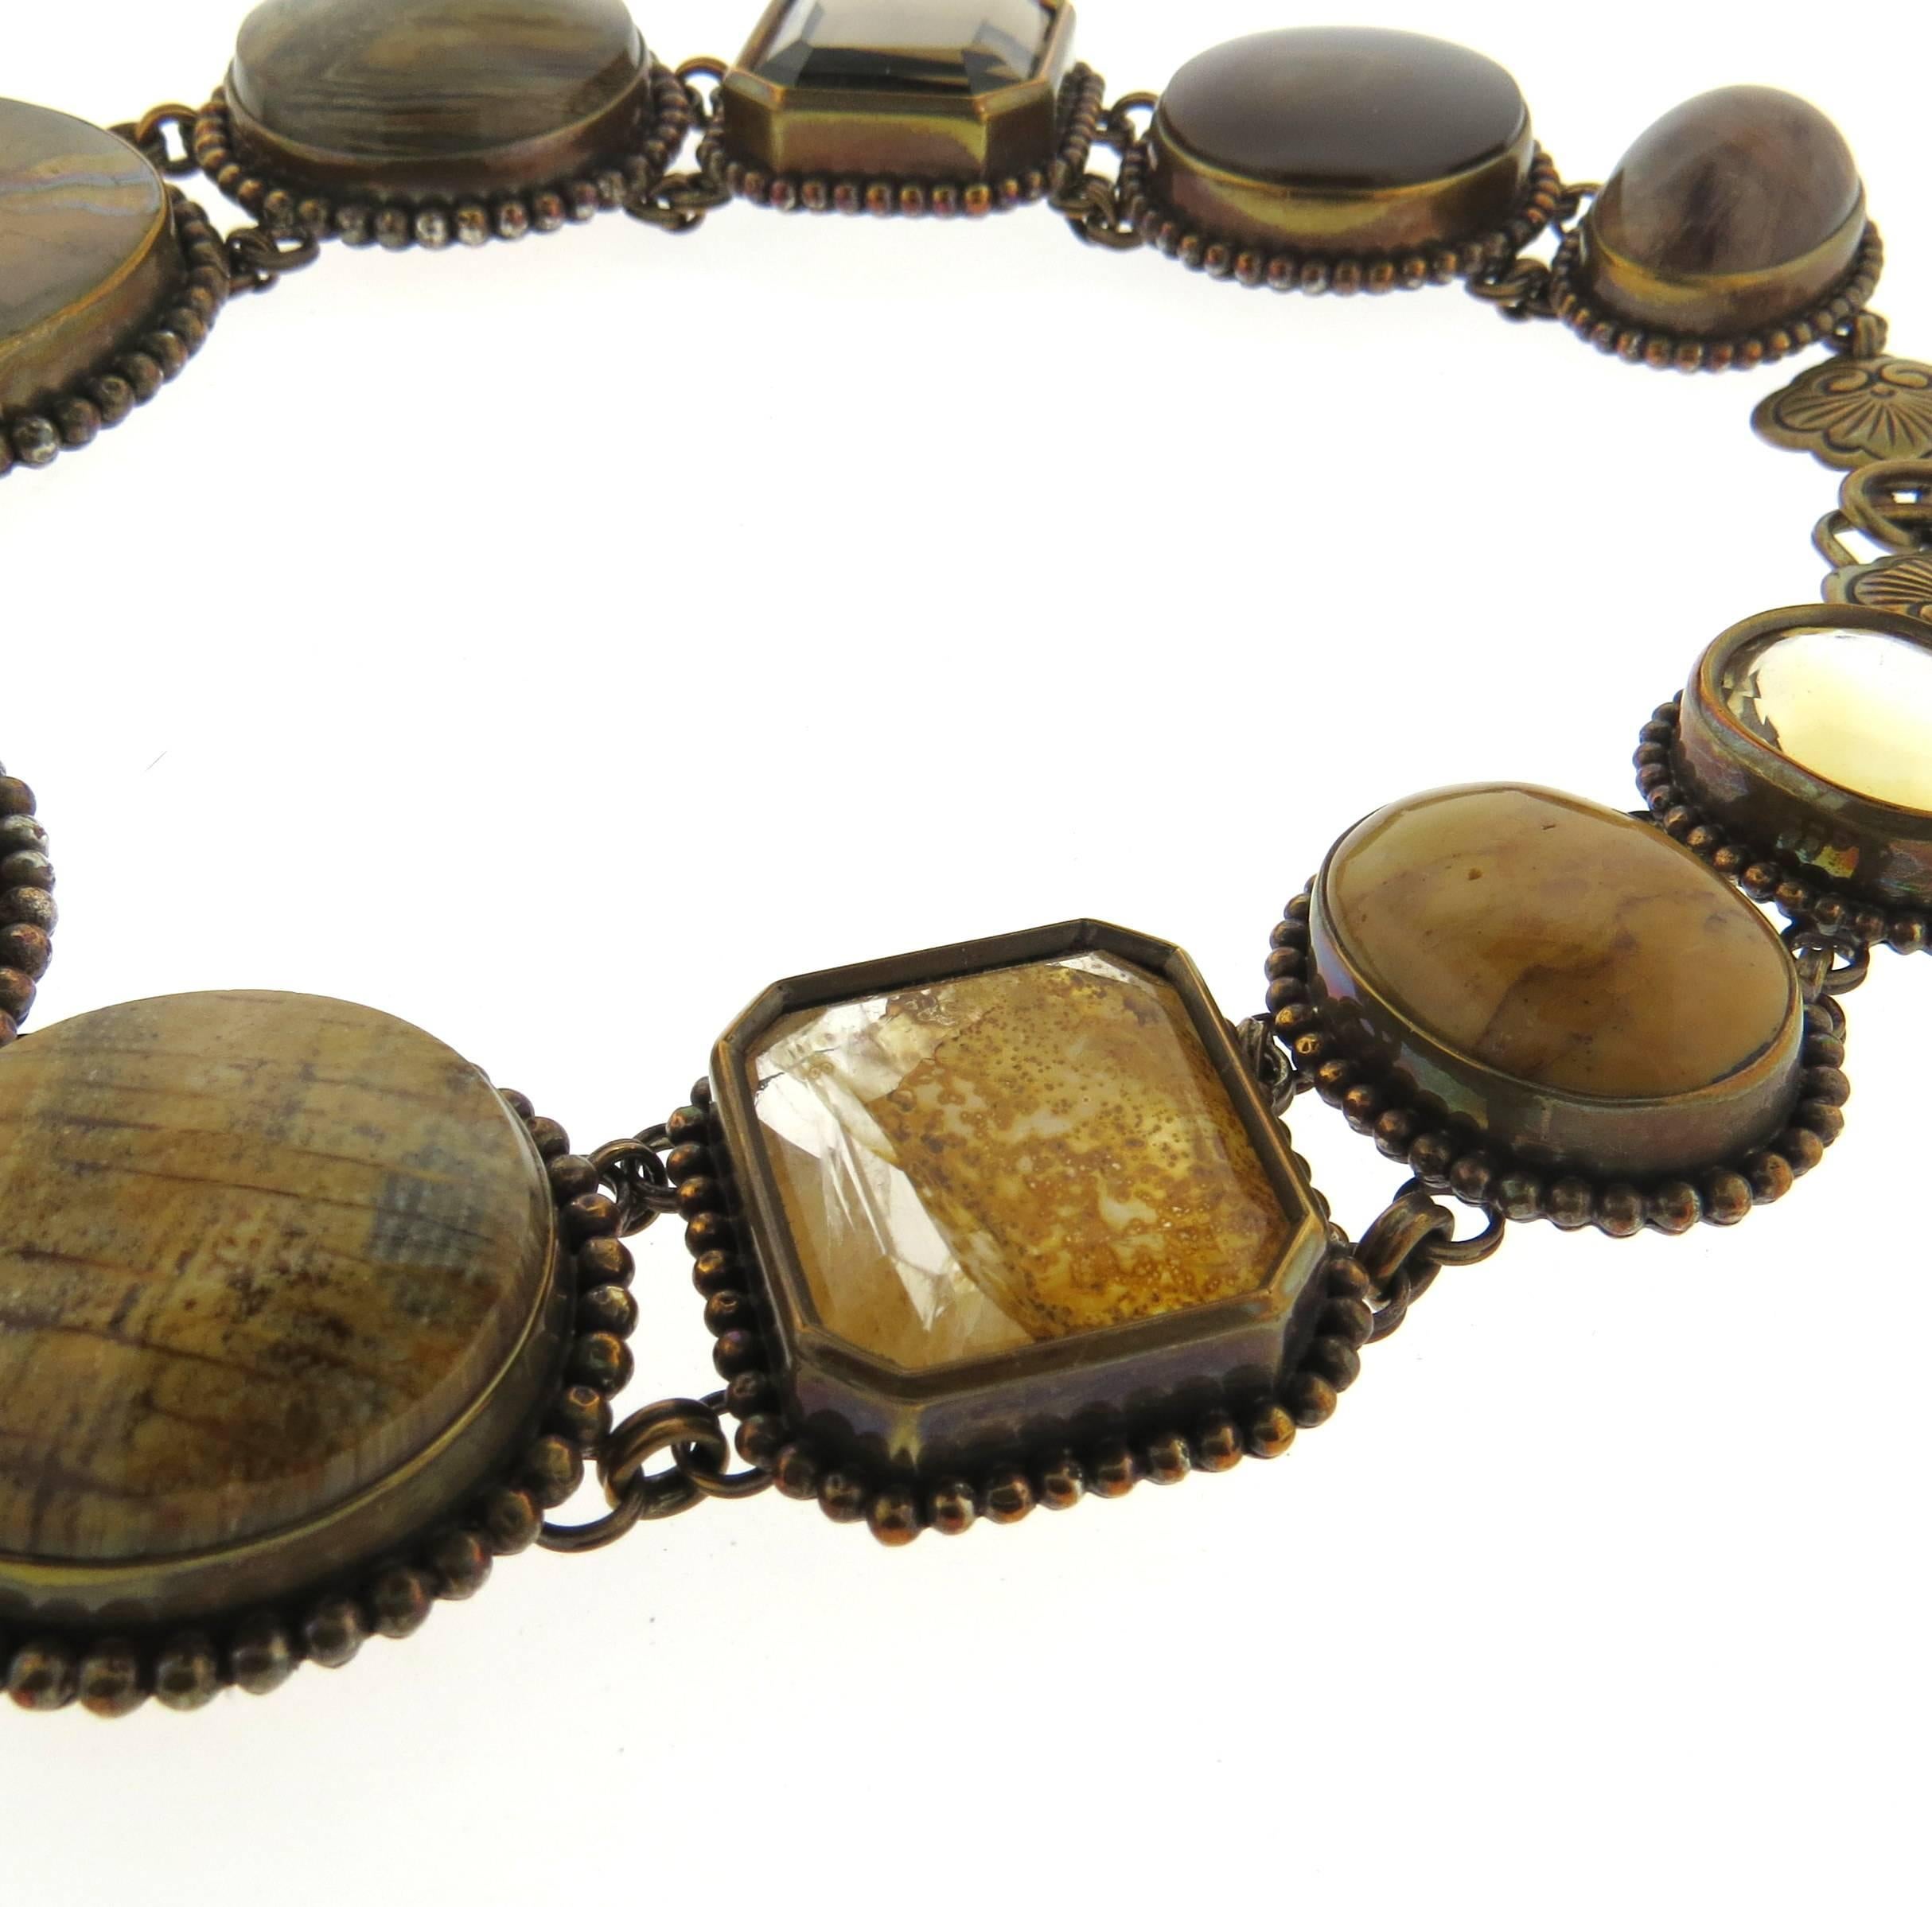 Large bronze necklace, crafted by Stephen Dweck, decorated with multi semi precious gemstones, amber and fossils. Necklace is 18